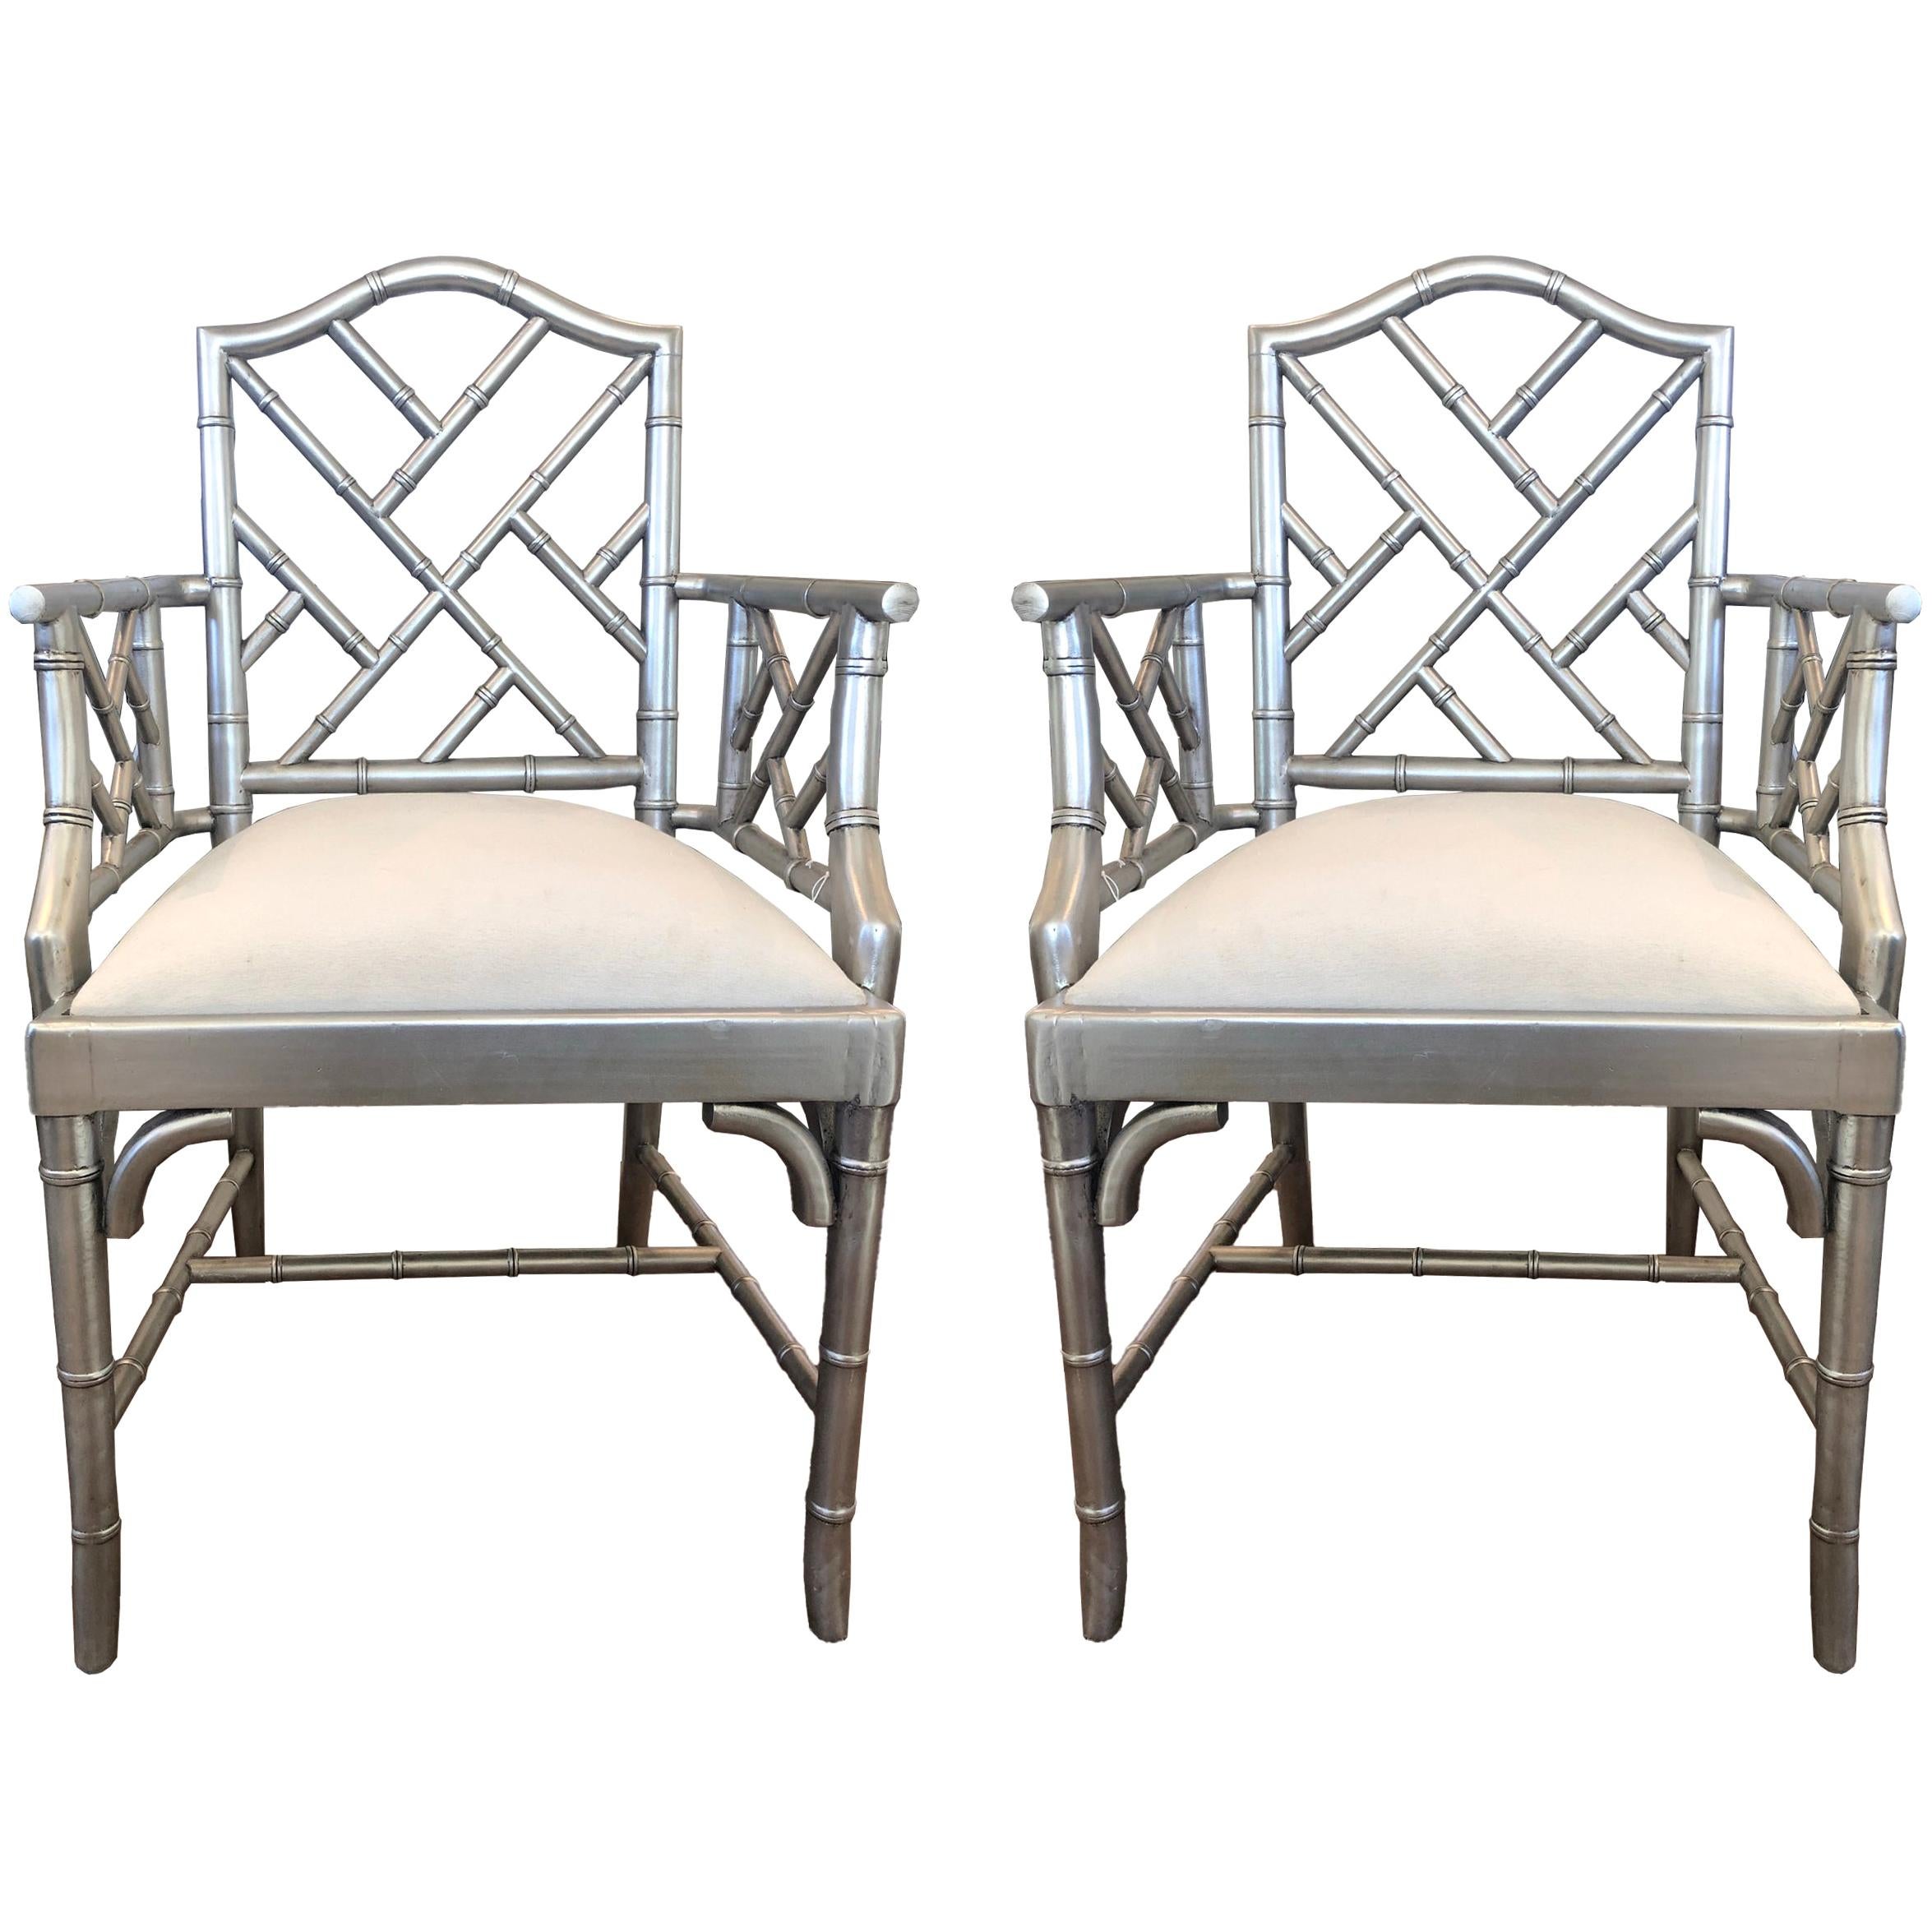 Vintage Chippendale Armchairs, a Pair